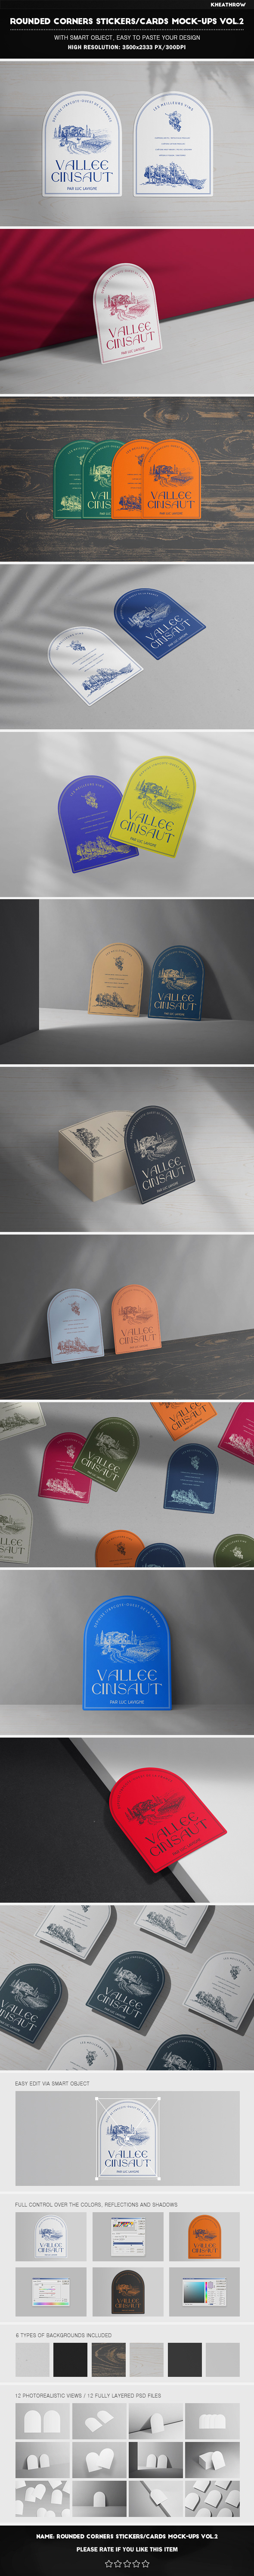 ROUNDED CORNERS STICKERS / CARDS MOCK-UPS VOL.2